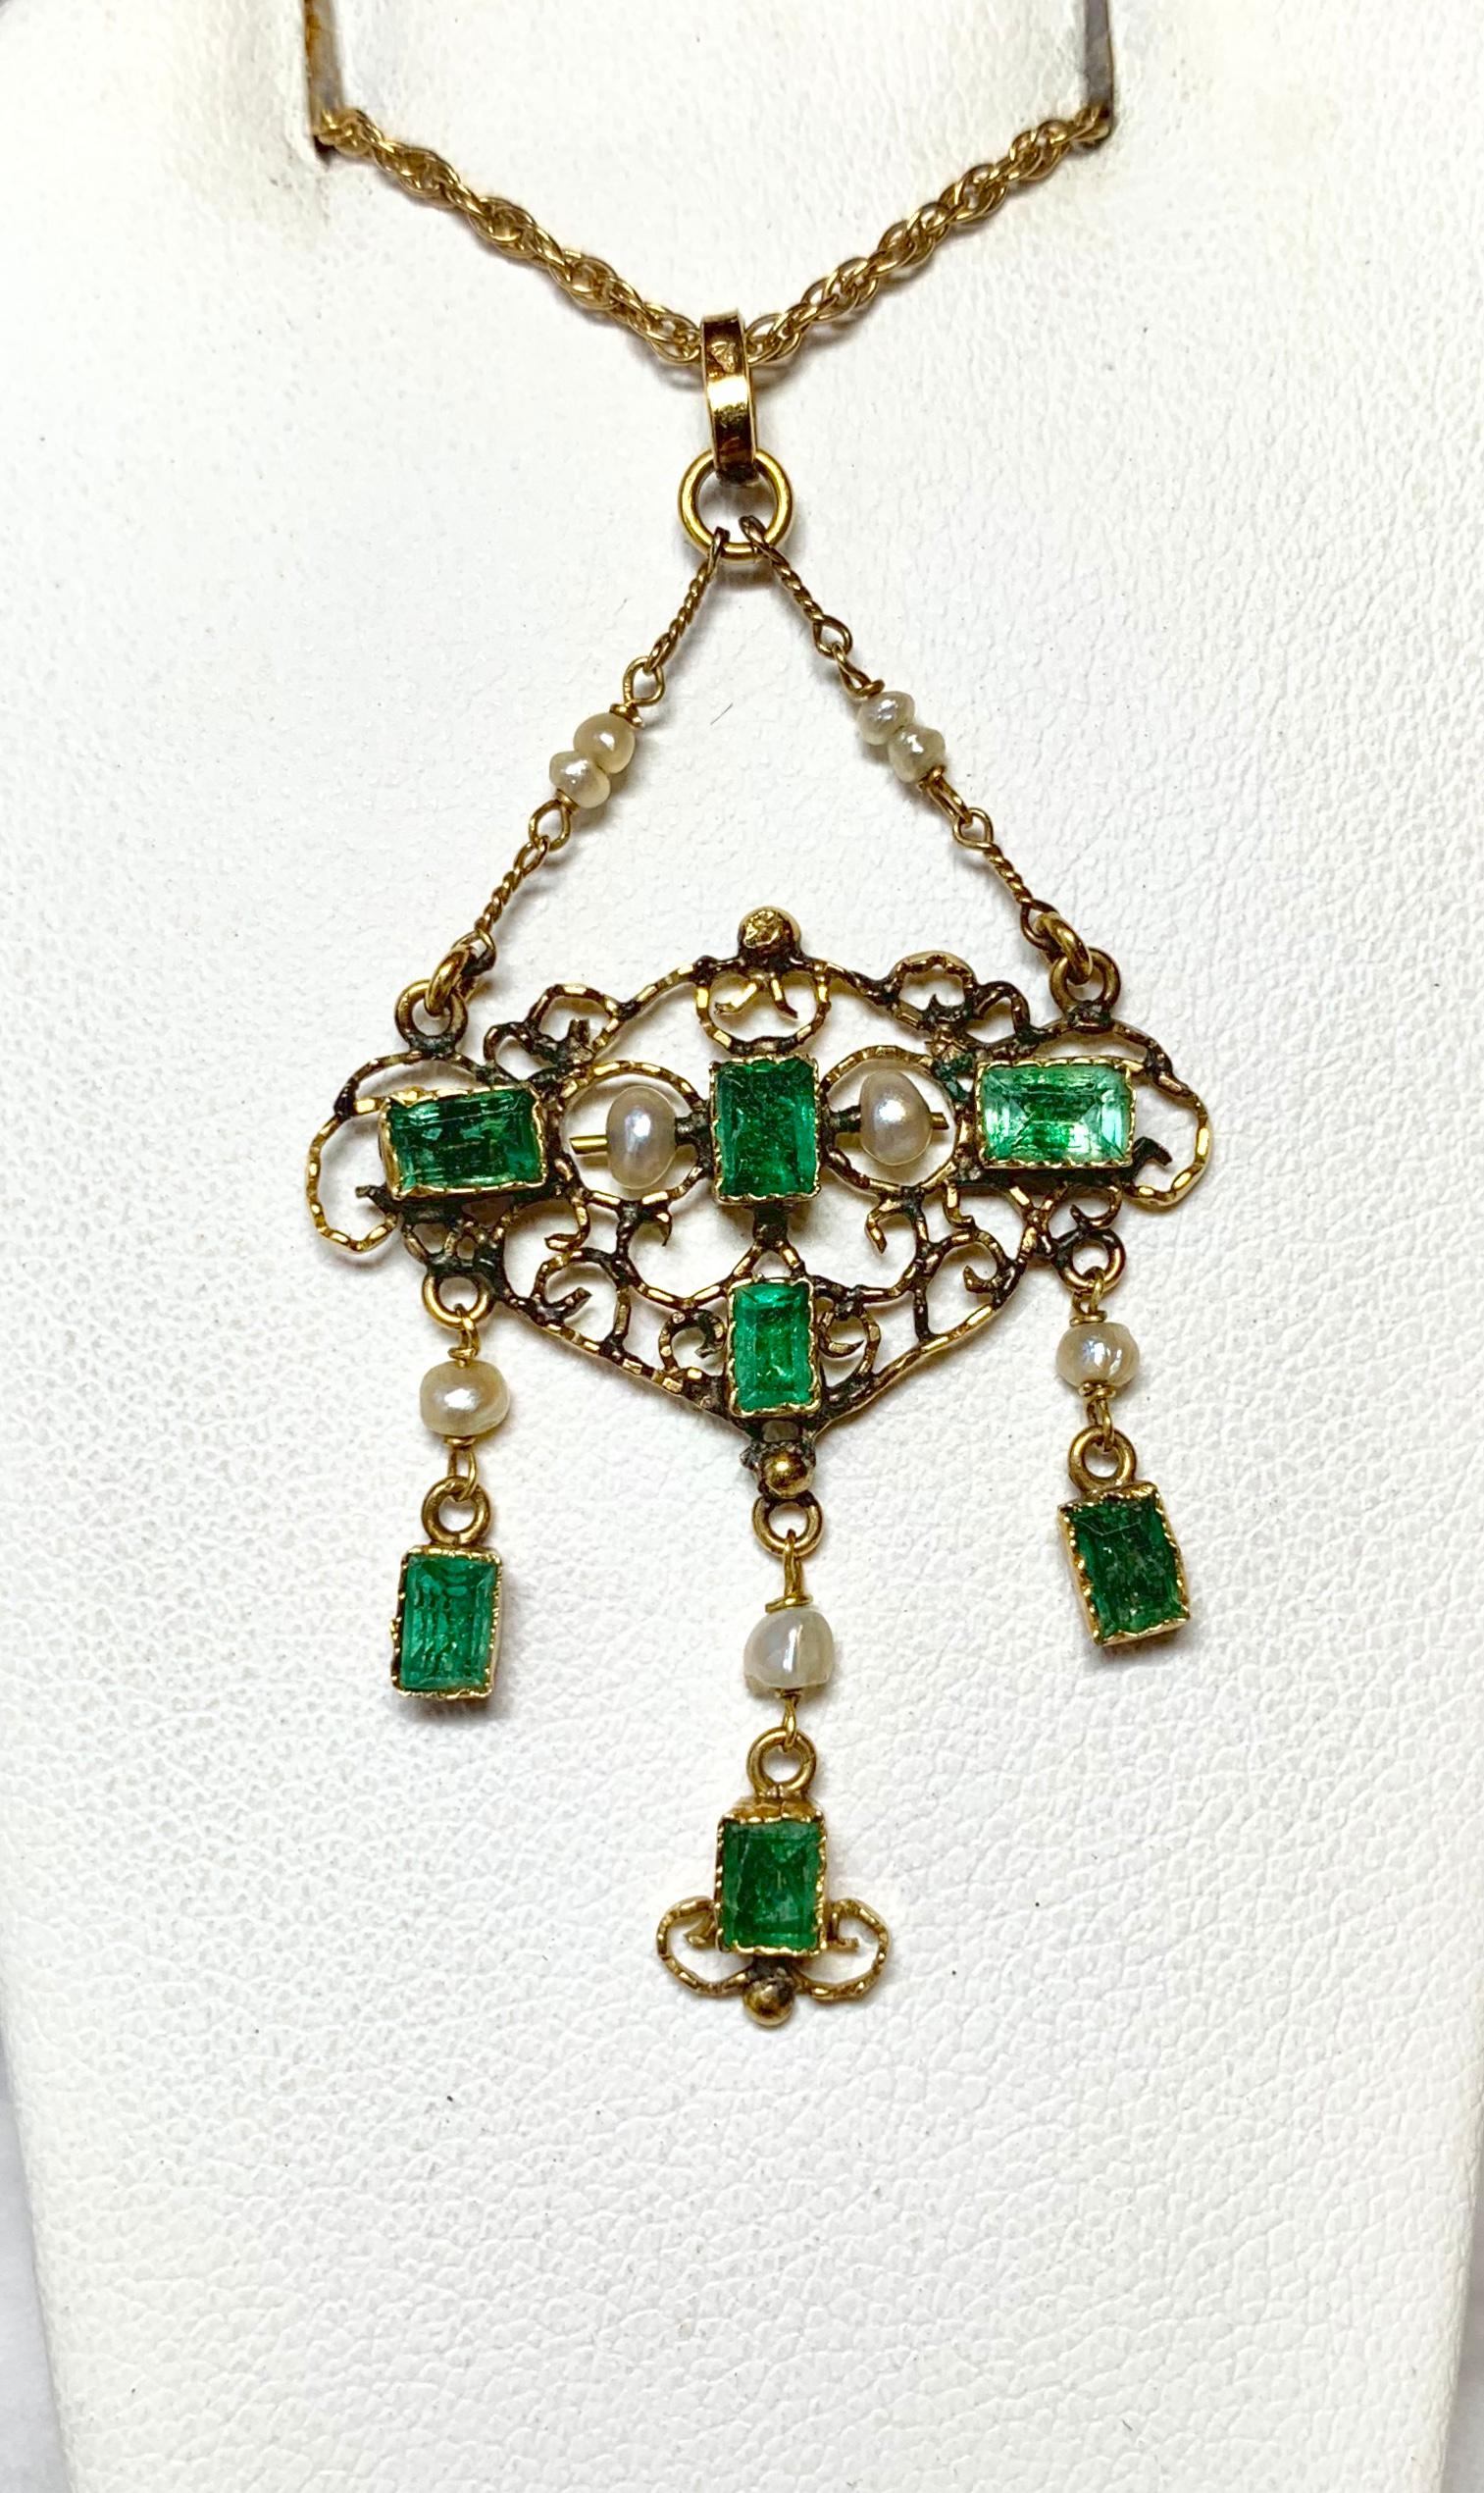 This is an antique Emerald and Pearl Pendant Necklace set with seven gorgeous green emerald cut rectangular Emeralds in the Renaissance Revival Style.  The Emeralds total approximately 1.4 Carats and they are accented by silvery white pearls and set